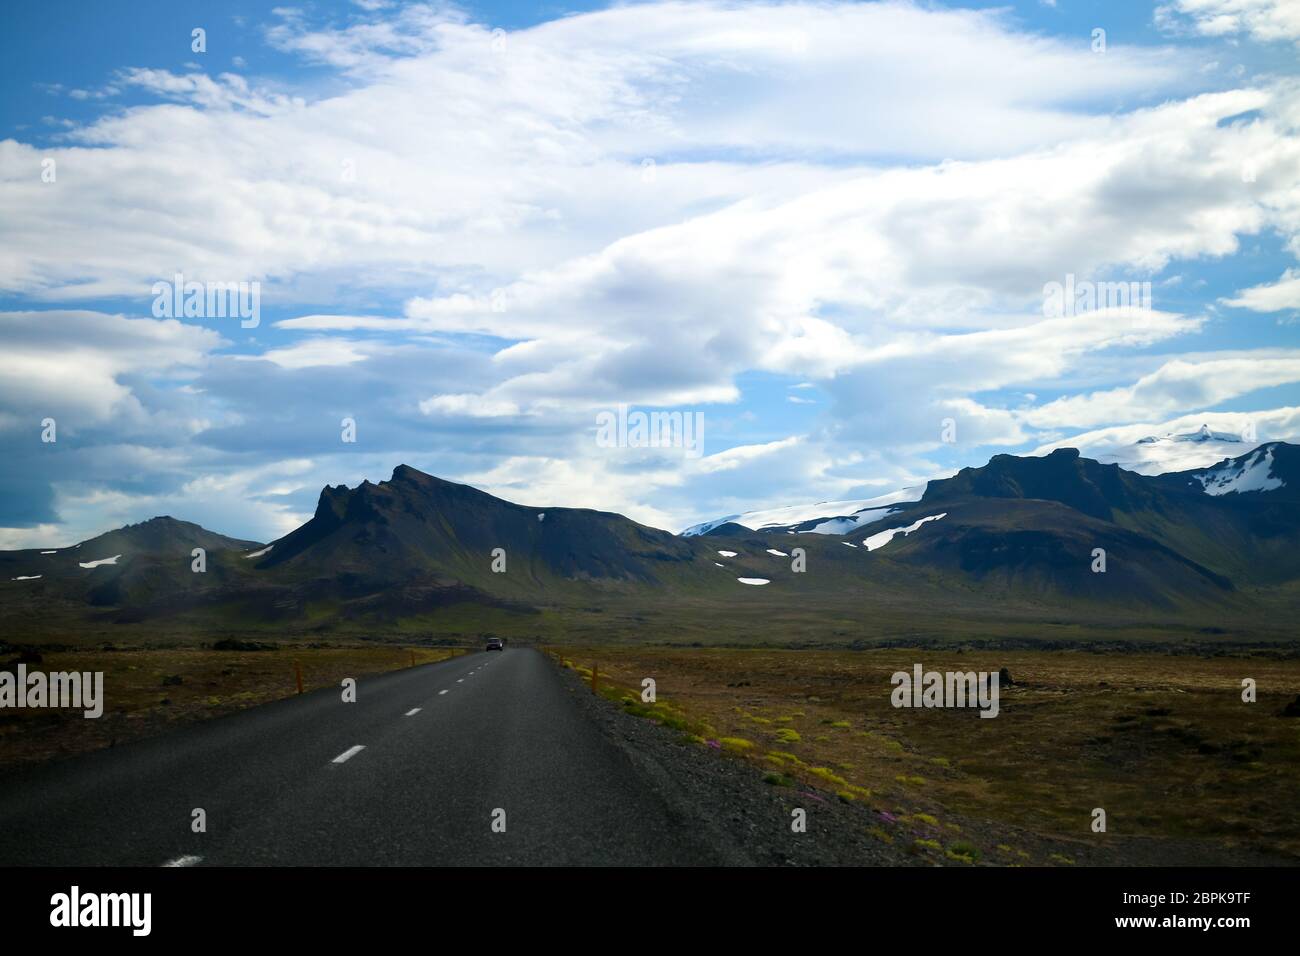 On a roadtrip in Iceland, you can see beautiful sceneries, mountains, snow, blue sky and amazing clouds. Stock Photo